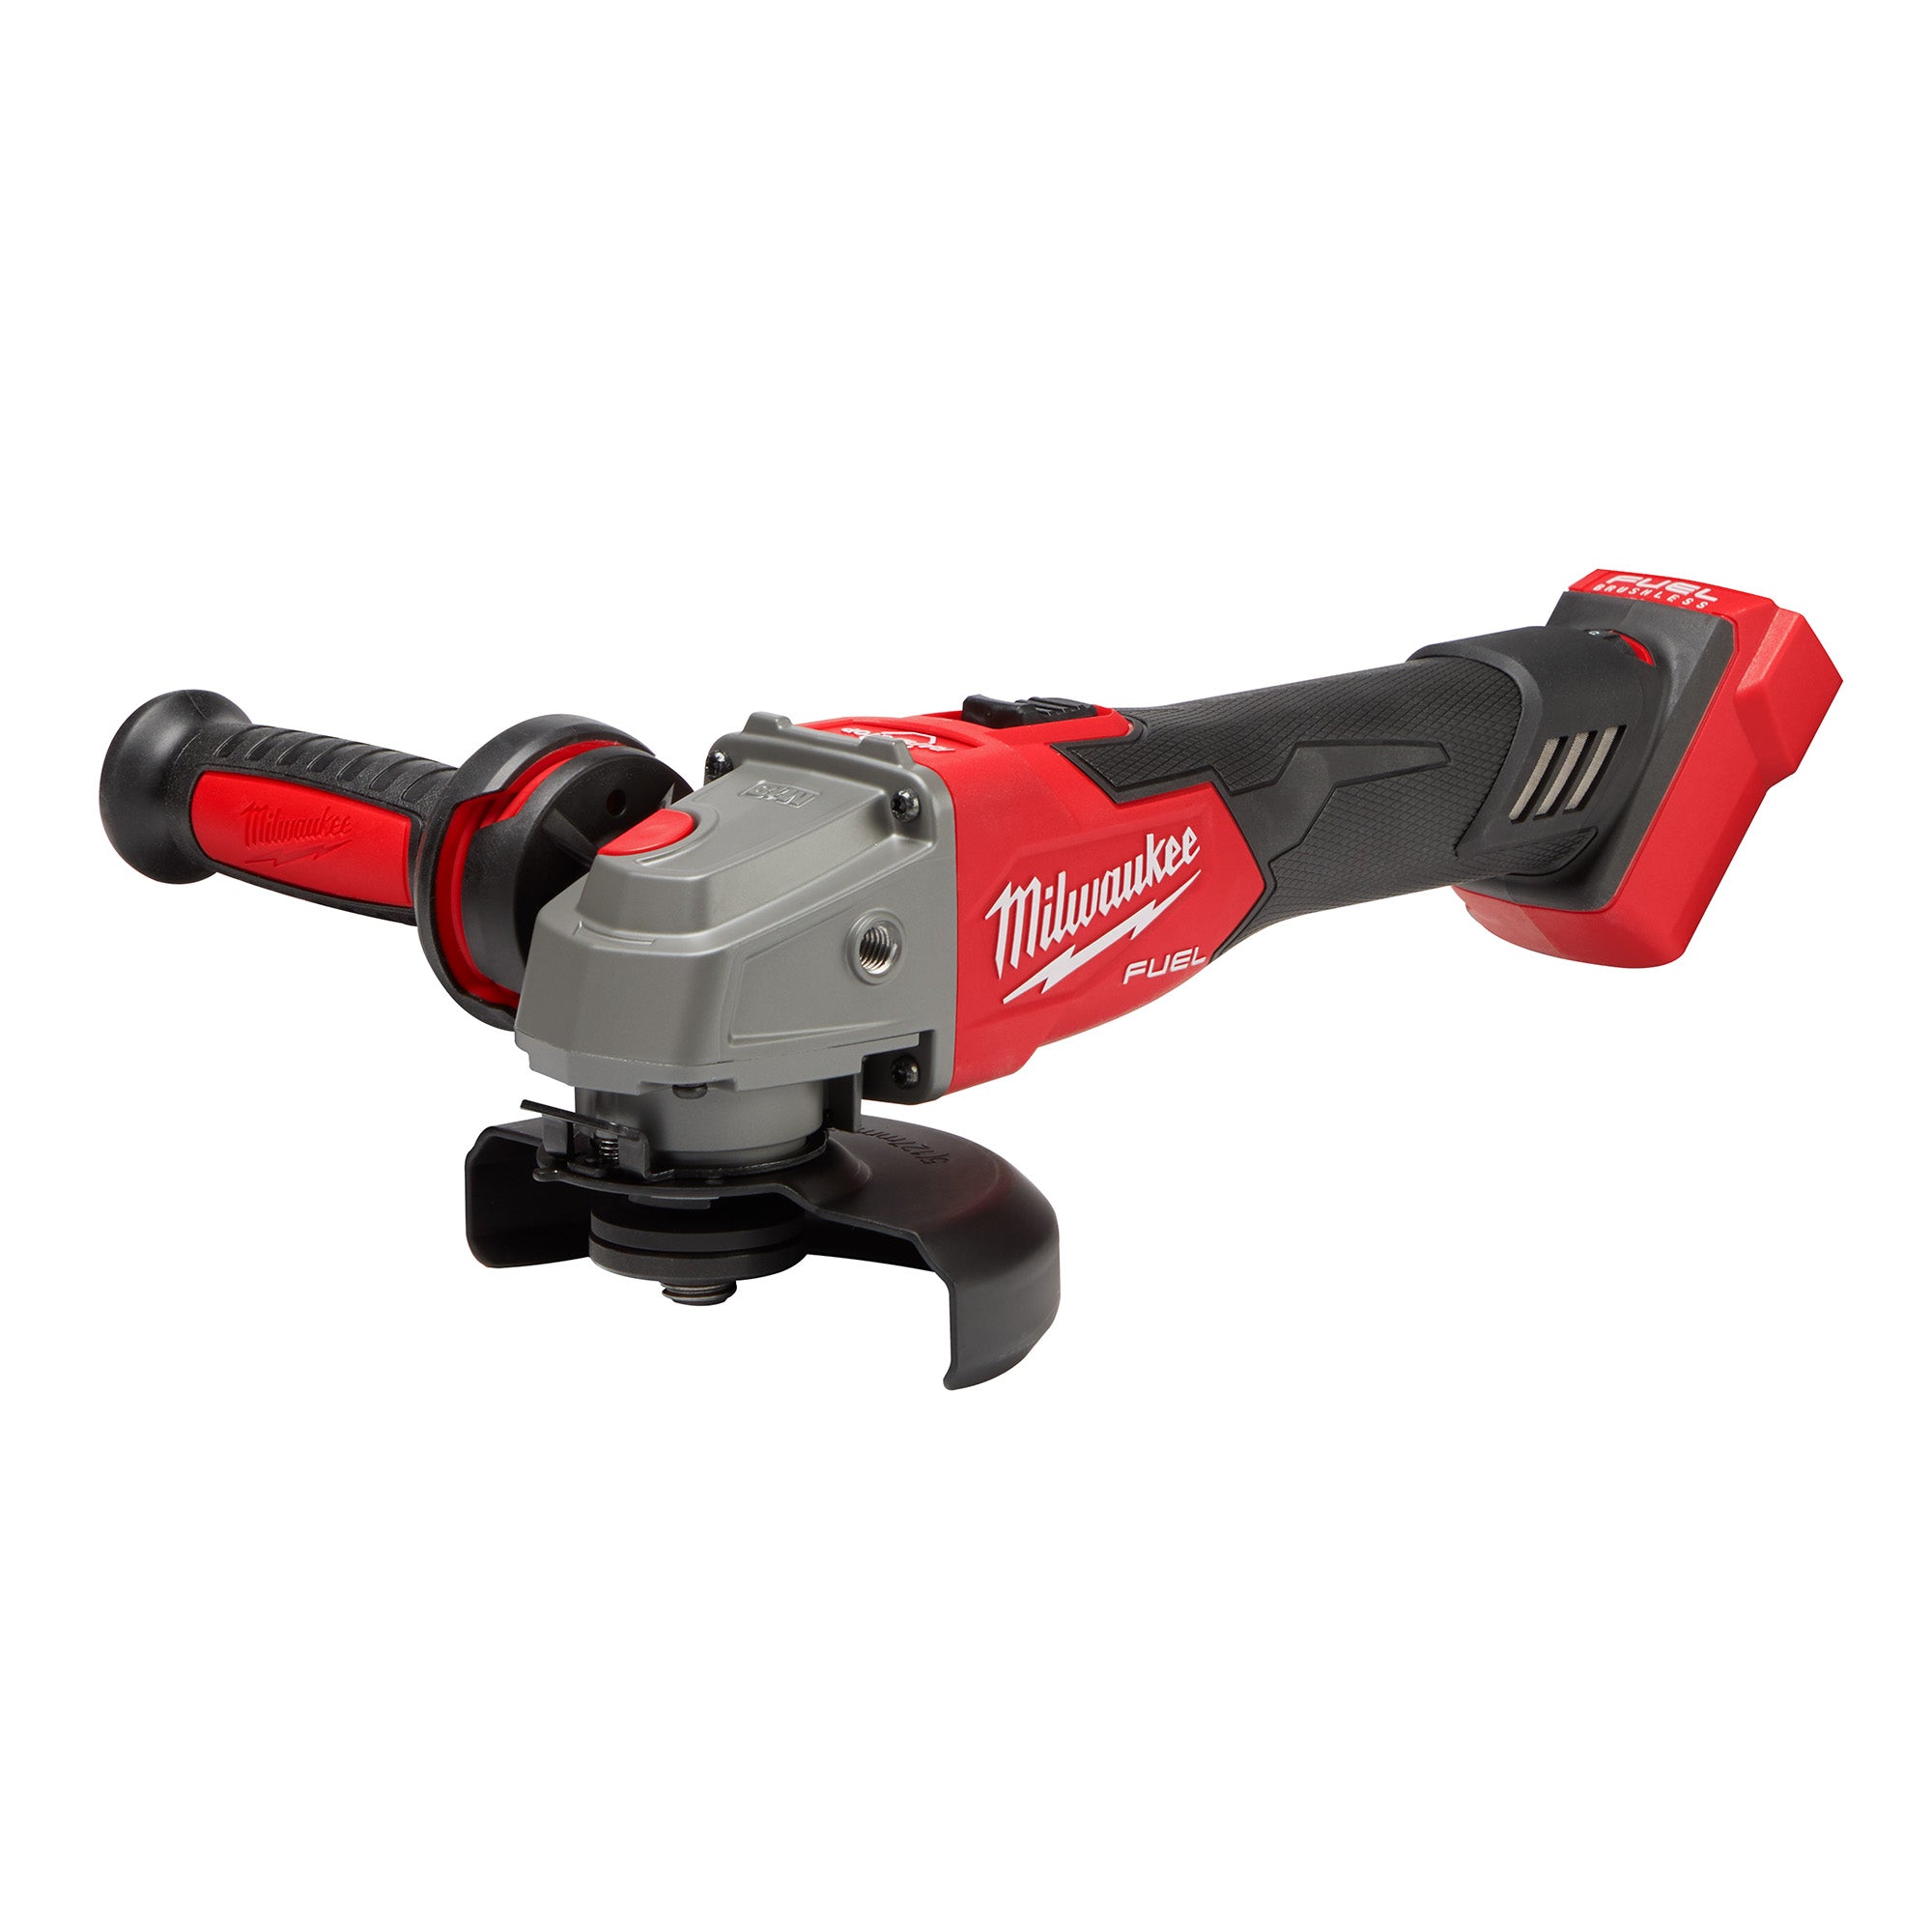 18V M18 FUEL Lithium-Ion Brushless Cordless 4-1/2" / 5" Variable Speed Braking Slide Switch Lock-On Grinder (Tool Only)